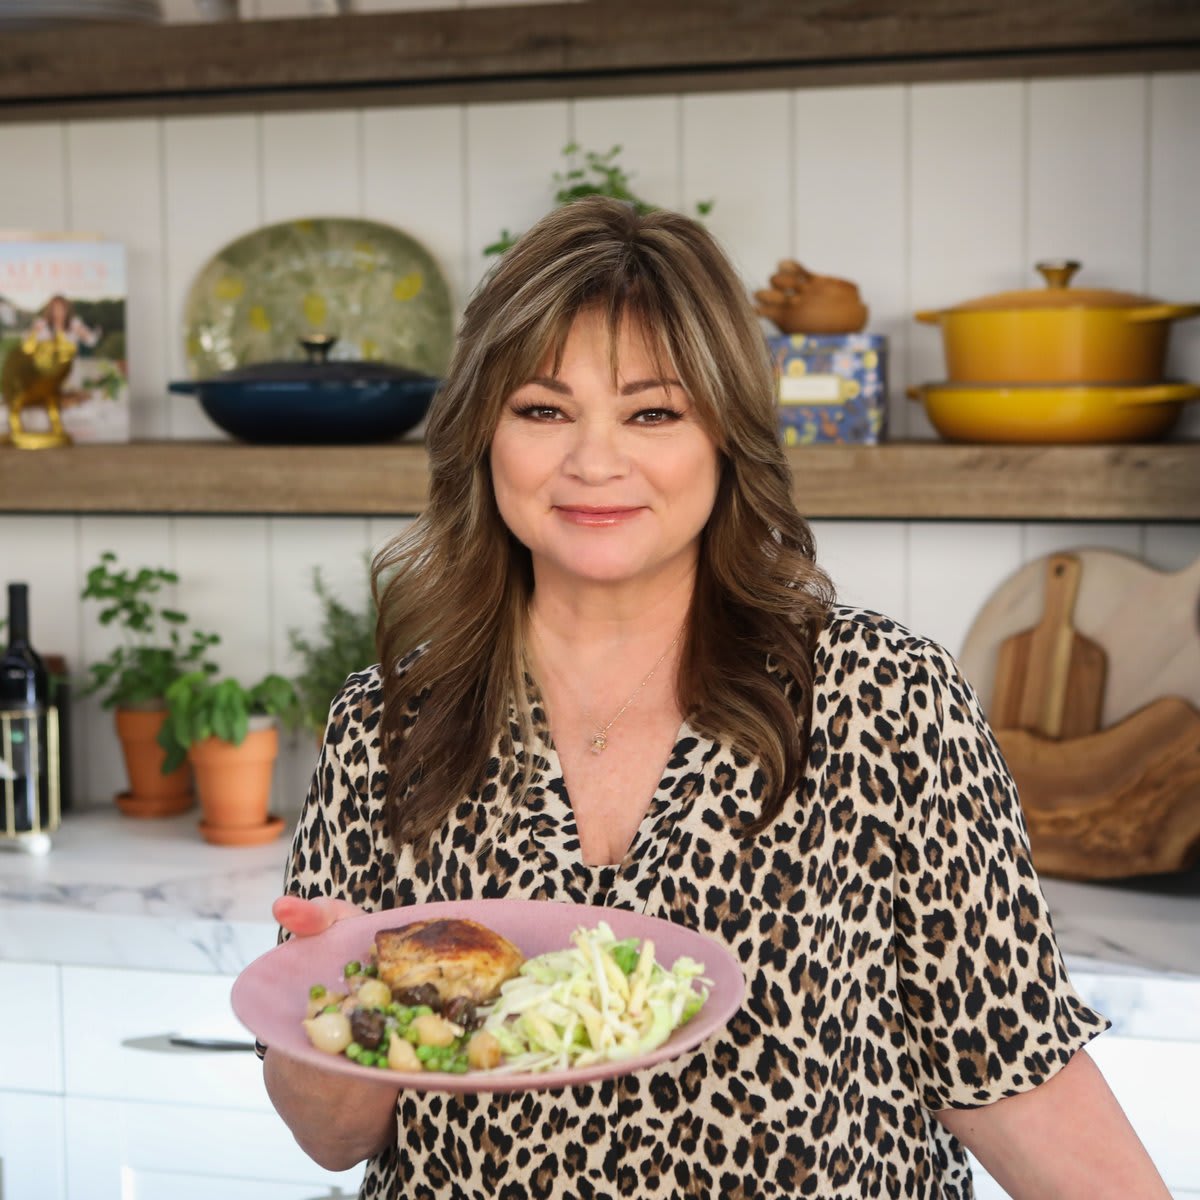 @wolfiesmom is treating herself and the animals around her to a hearty meal on an all-new Valerie's #HomeCooking! Don't miss it today at 11:30a|10:30c.